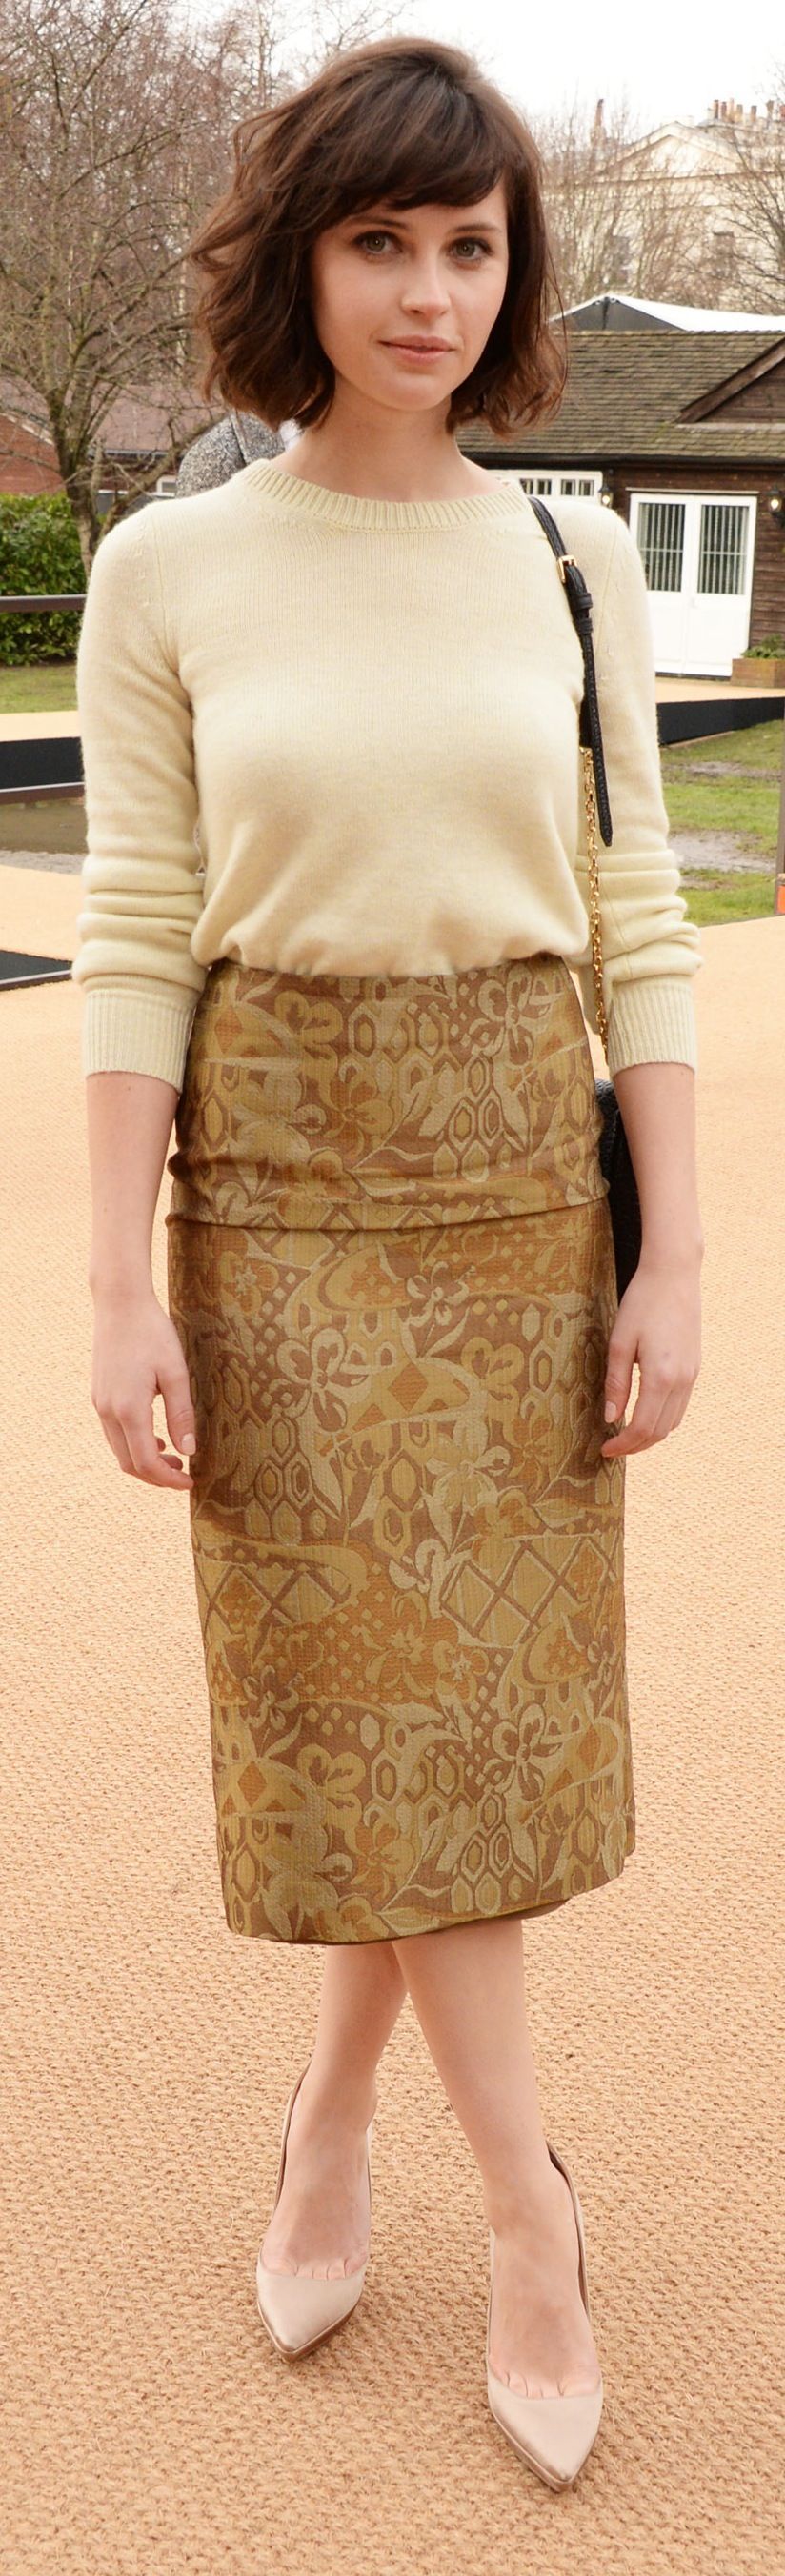 British actress Felicity Jones wearing Burberry at the Burberry Prorsum Womenswear A/W14 Show in London